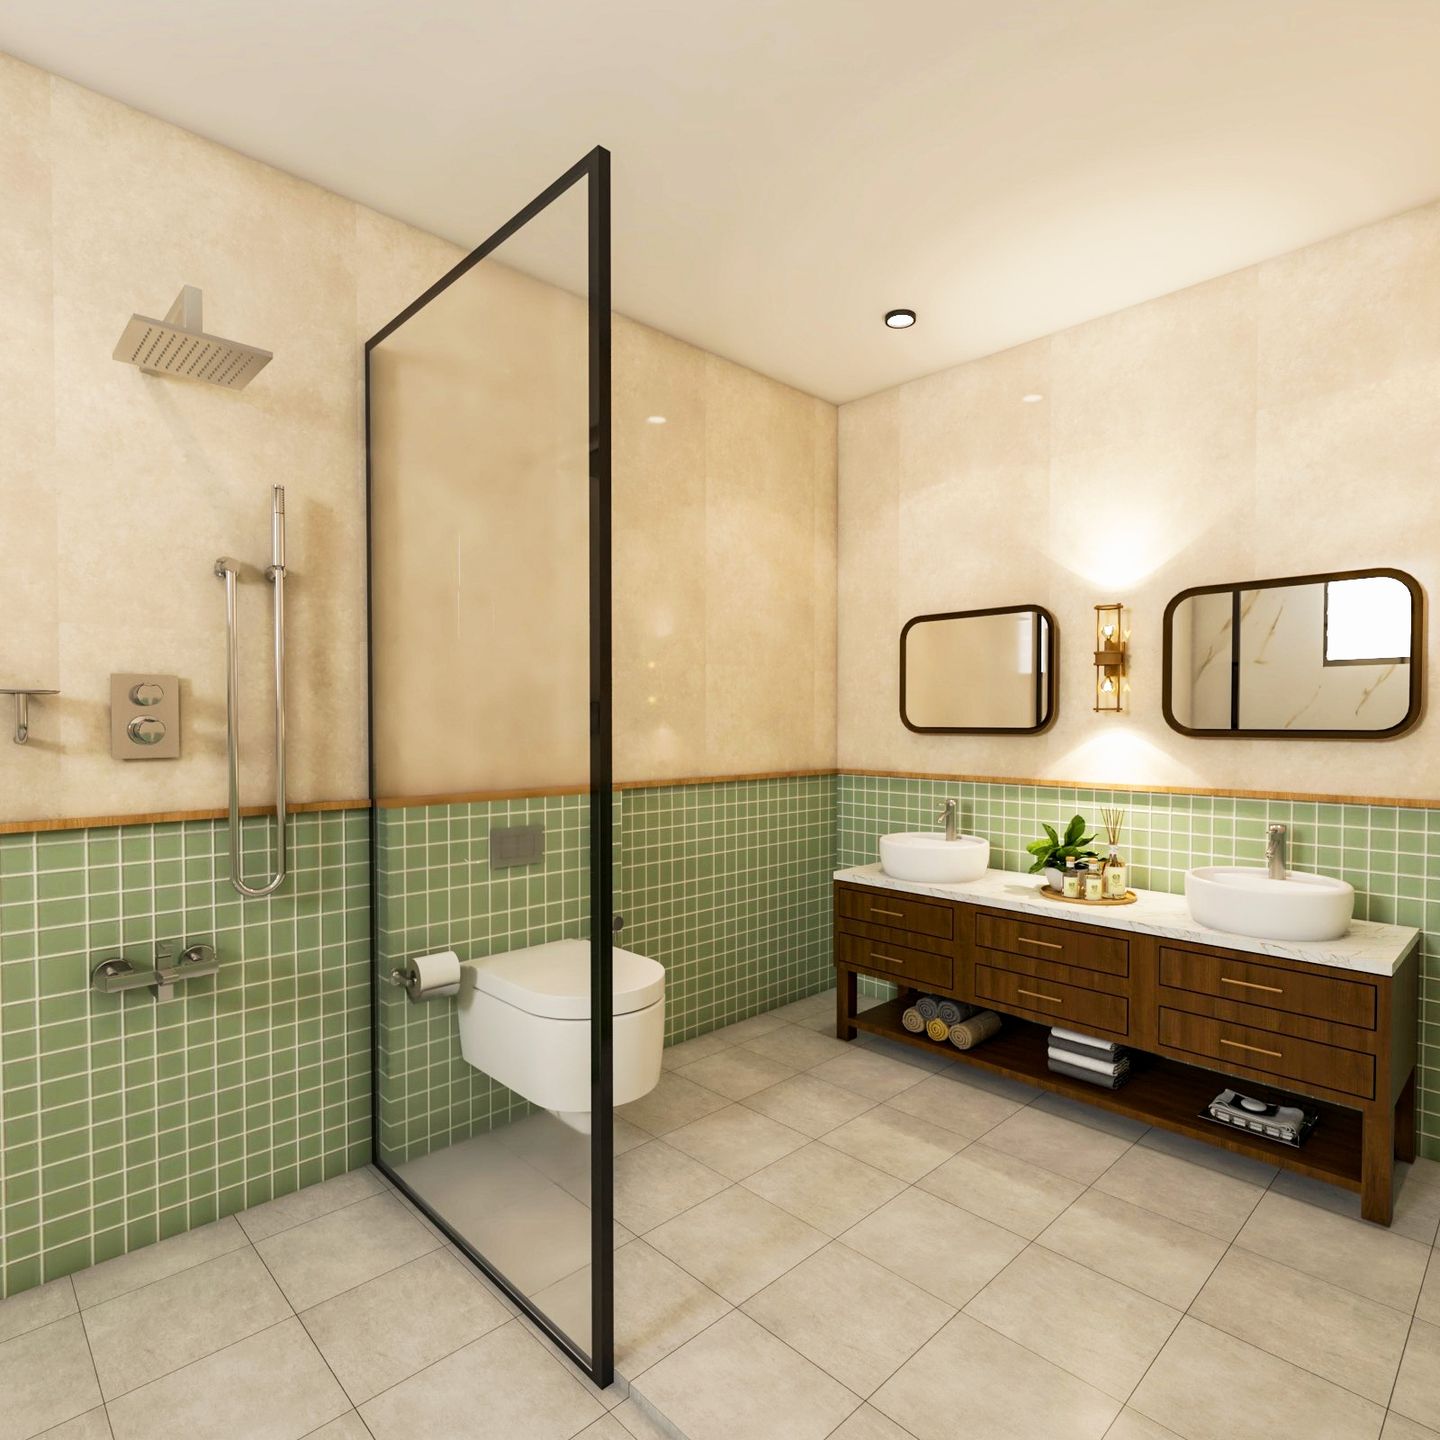 Bathroom Design With 2 Mirrors With Black Frames - Livspace